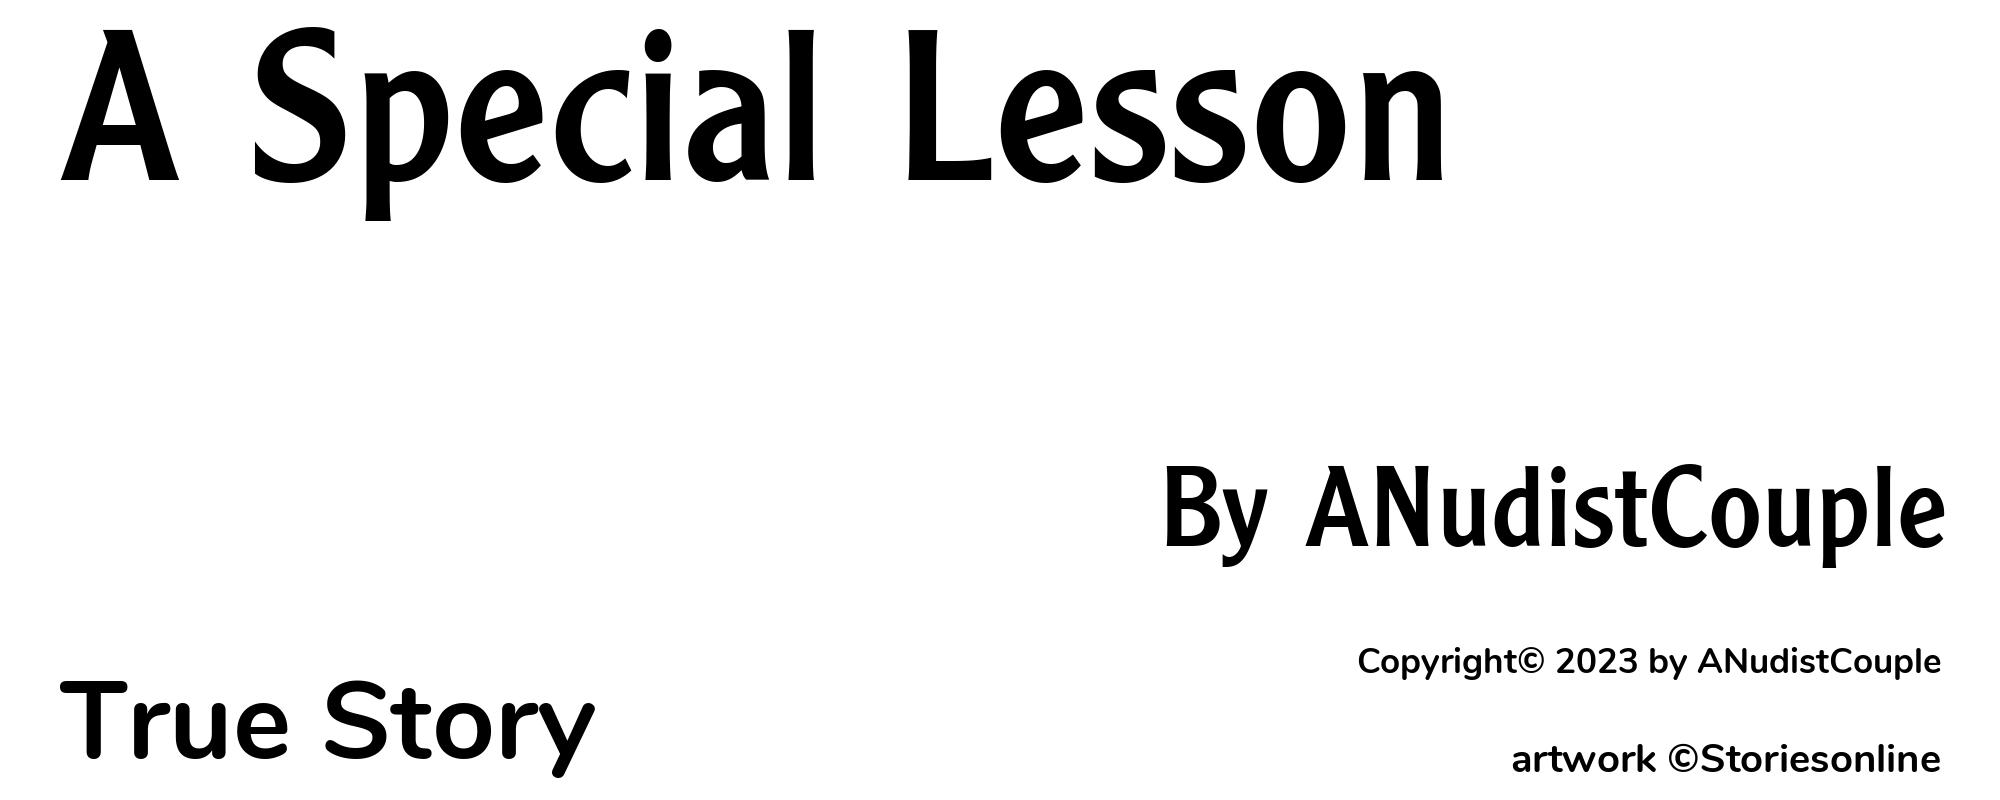 A Special Lesson - Cover